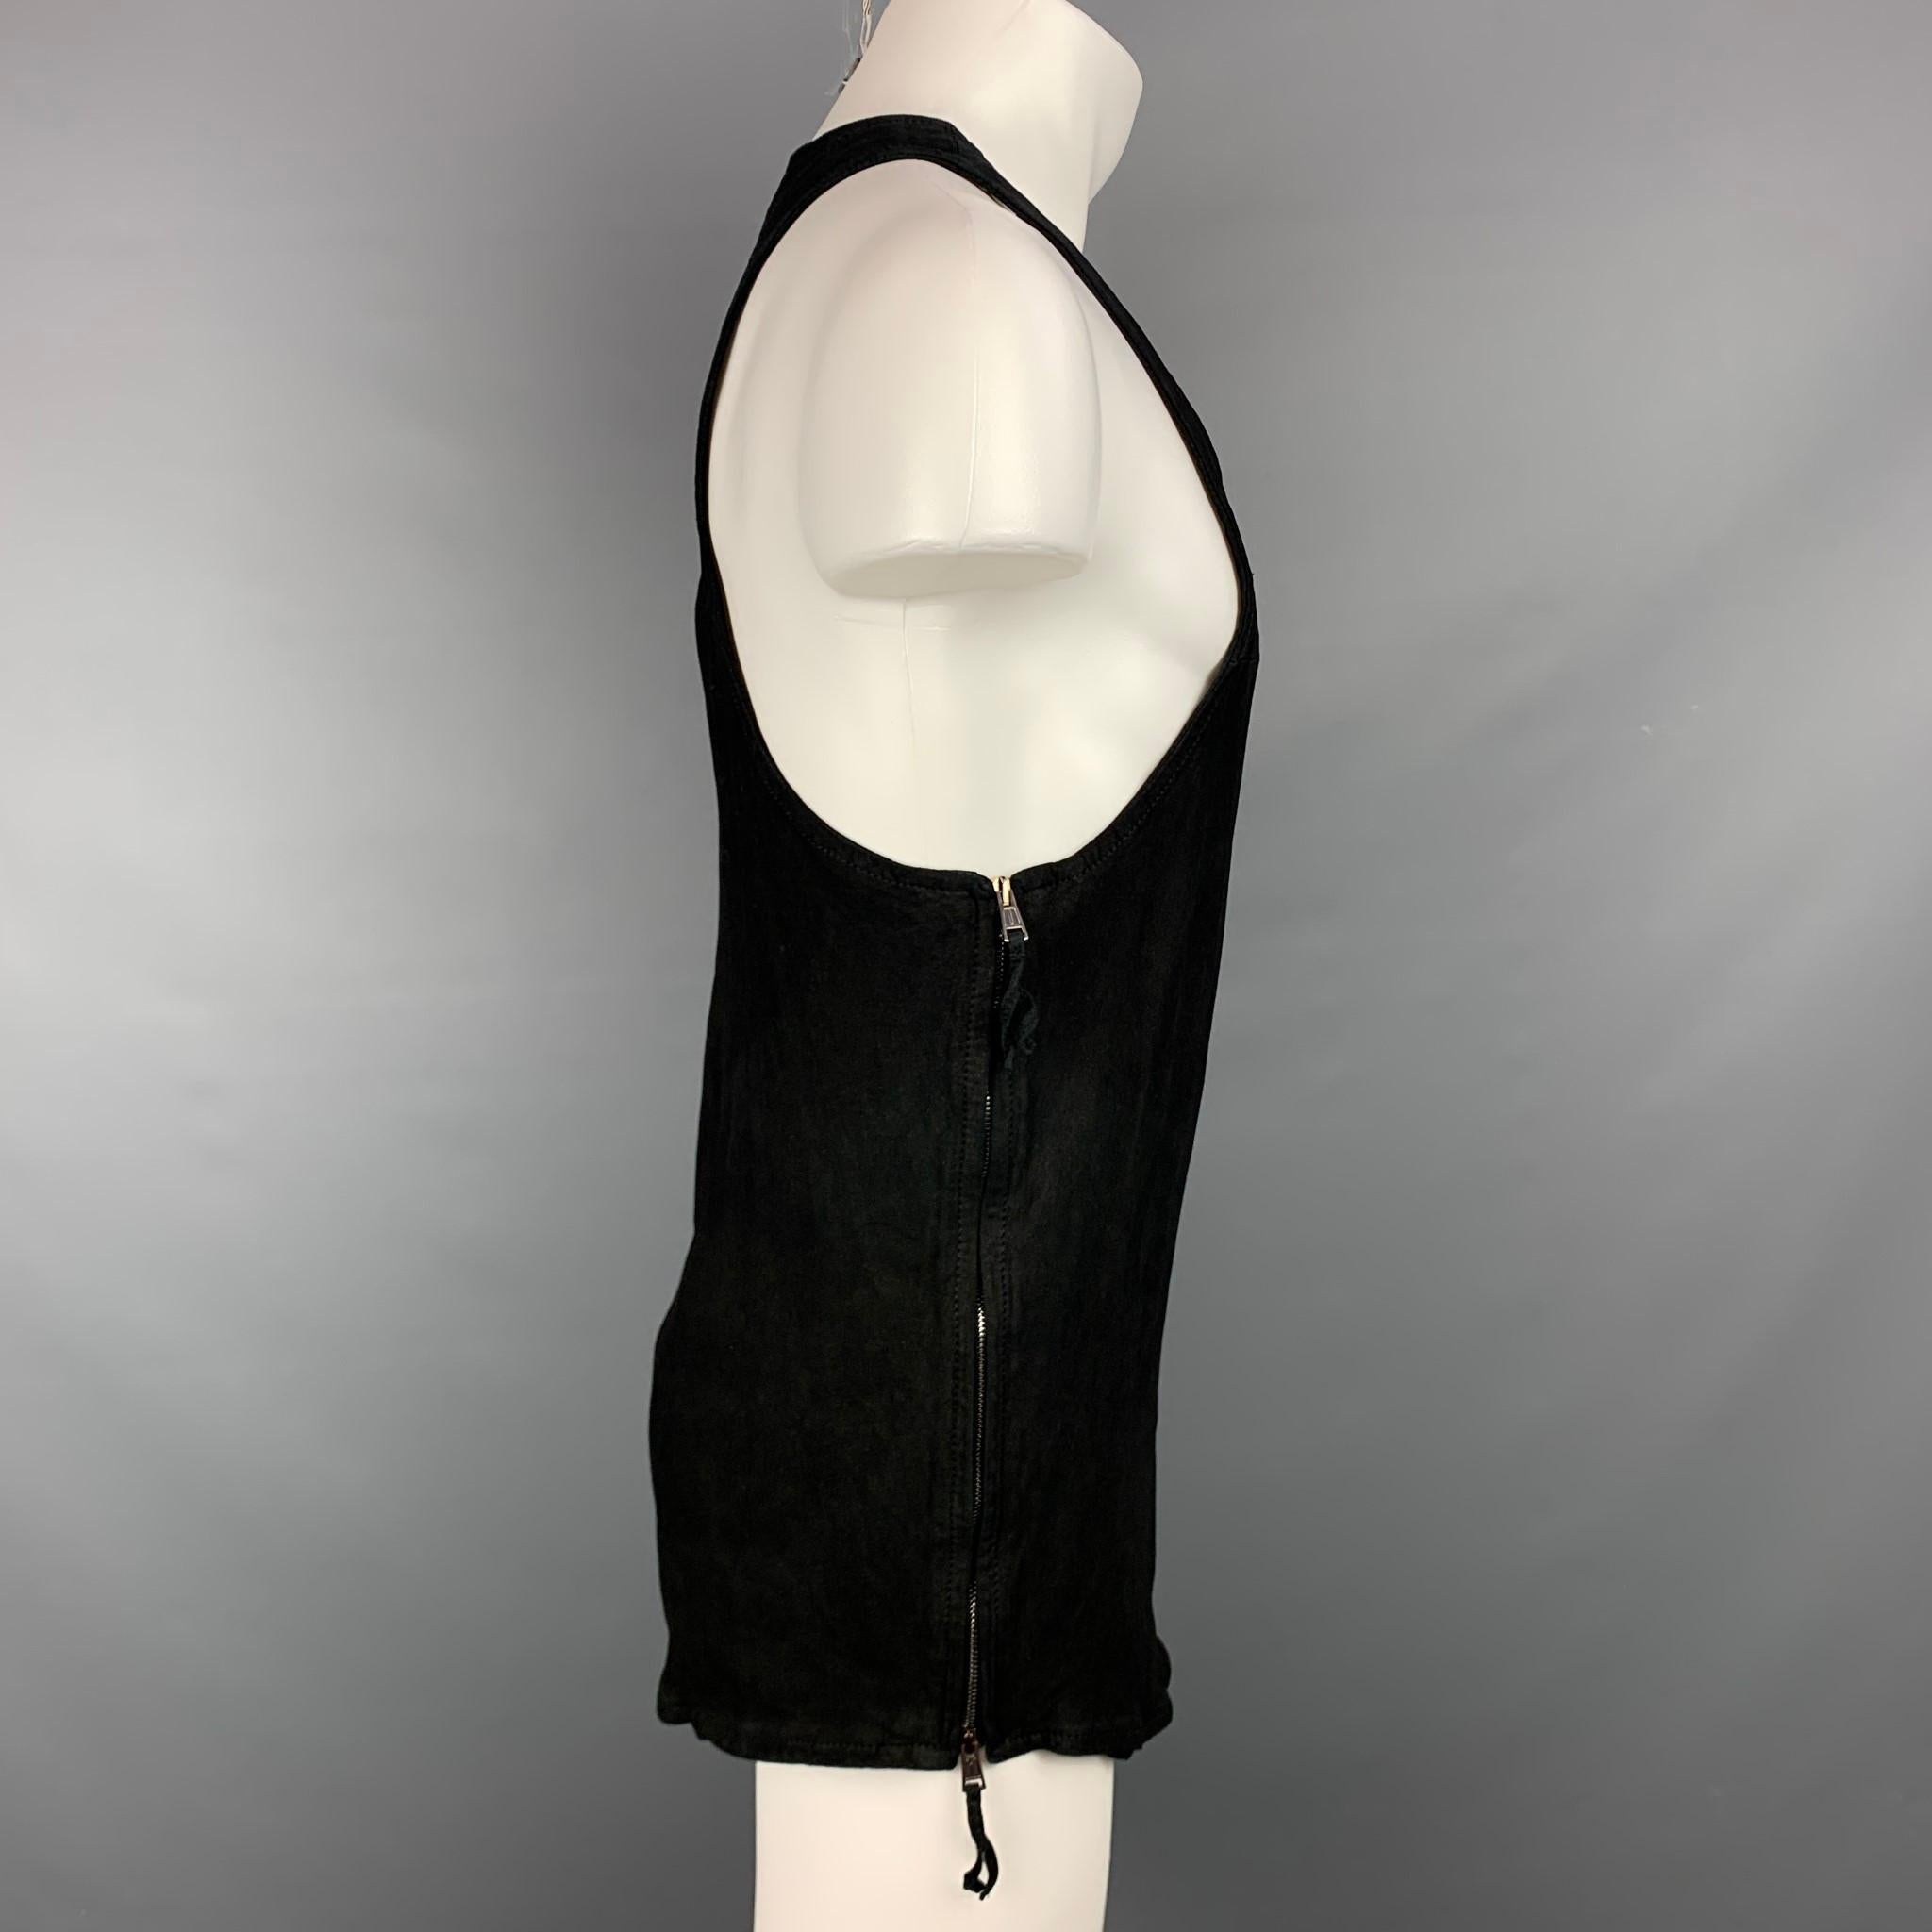 ALEXANDRE PLOKHOV tank top comes in a black suede with a full liner featuring a deep neckline and side zipper details. Made in Italy. 

Very Good Pre-Owned Condition.
Marked: IT 50

Measurements:

Chest: 34 in.
Length: 29 in.